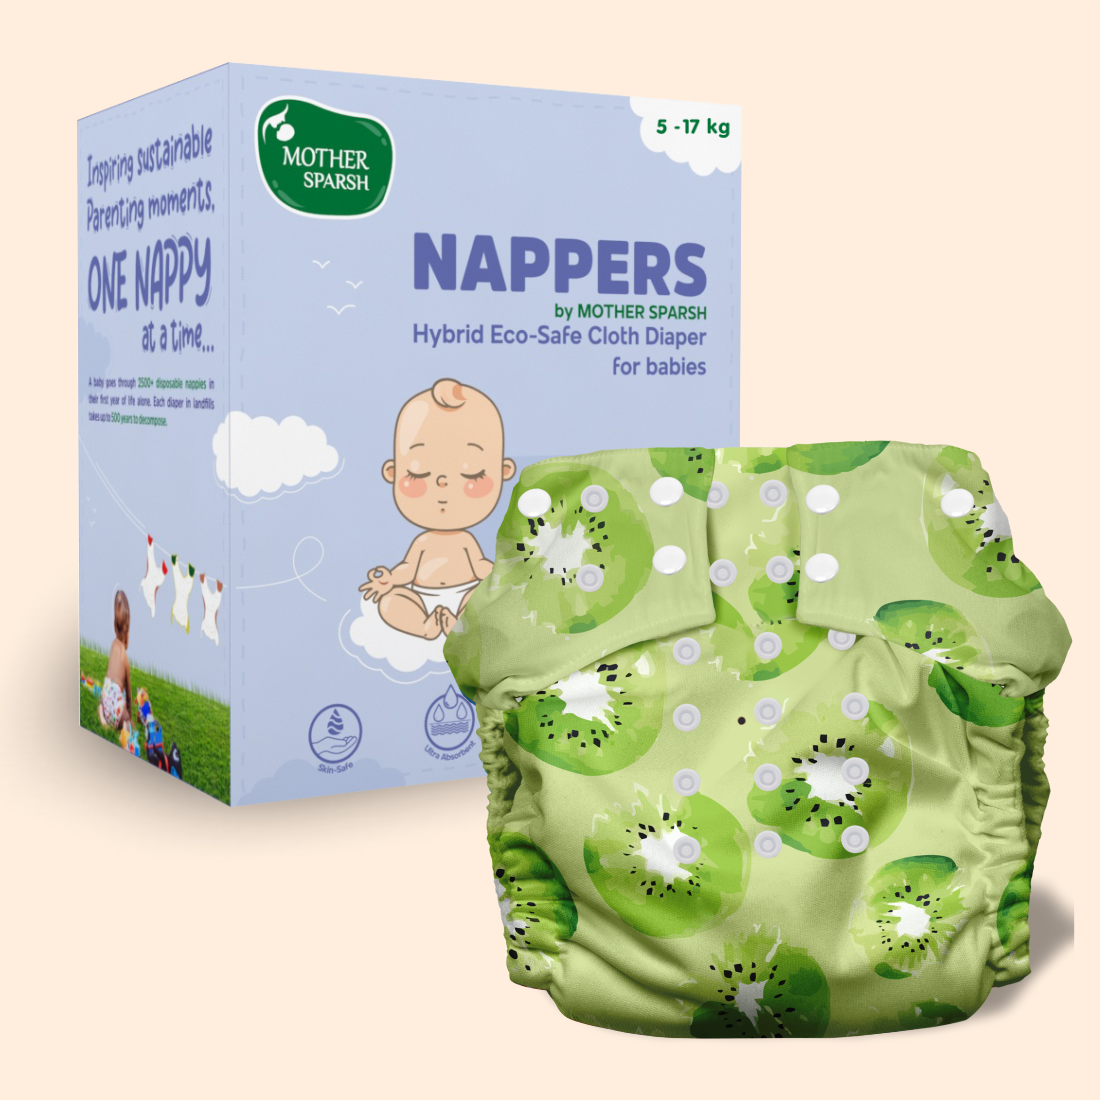 Best Diapers For Adults  Just Relax Adult Diapers Review  Urine  Incontinence  The Shubhi Tips  YouTube